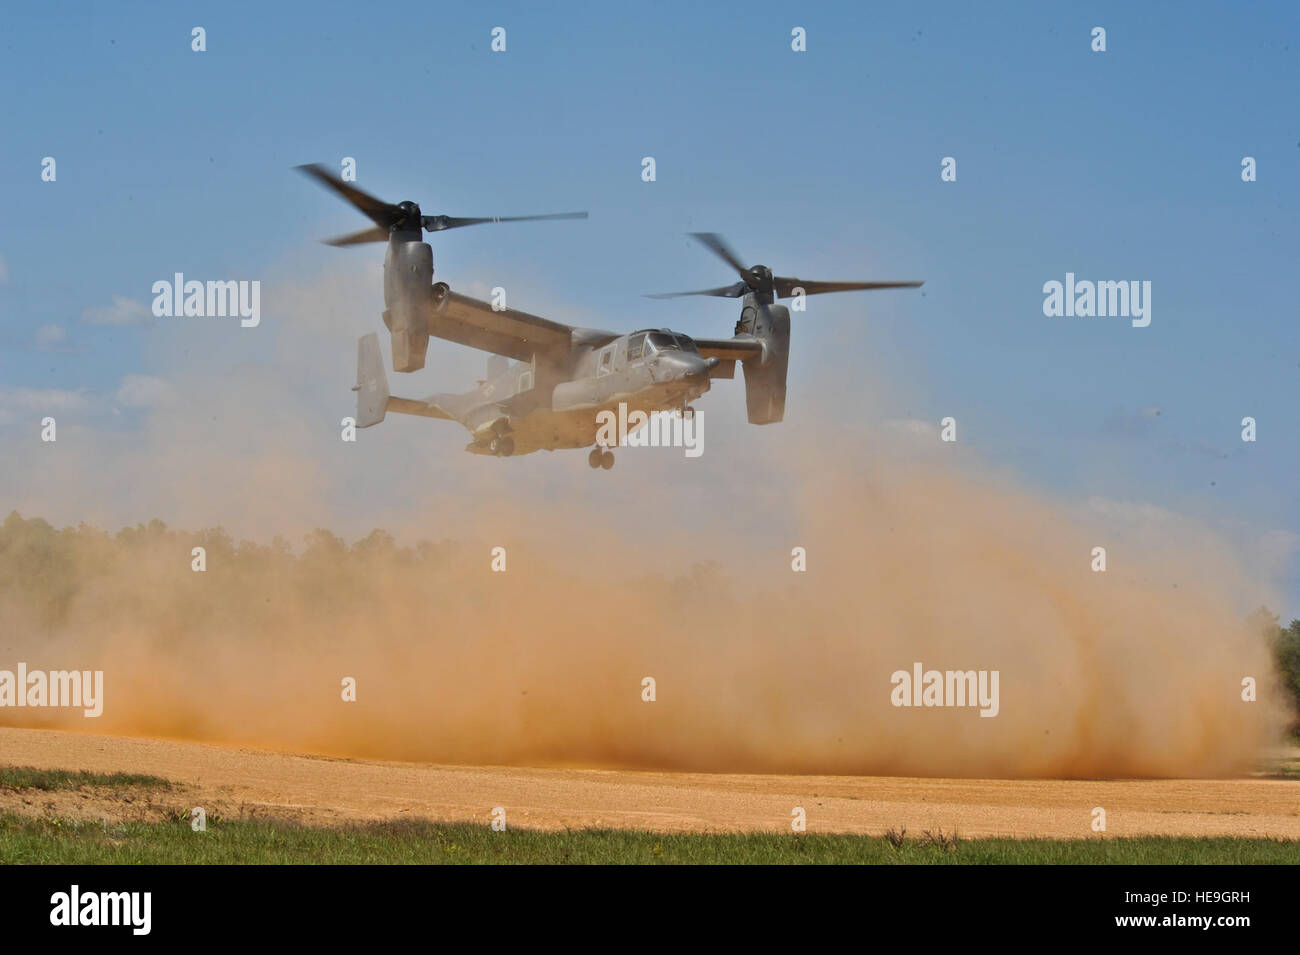 A U.S. Air Force CV-22 Osprey lands on  Eglin Range, Fla., May 21, 2014. The CV-22 is capable of functioning as a helicopter and can convert to a turboprop aircraft to accomplish high-speed forward flight.Staff Sgt. John Bainter) Stock Photo